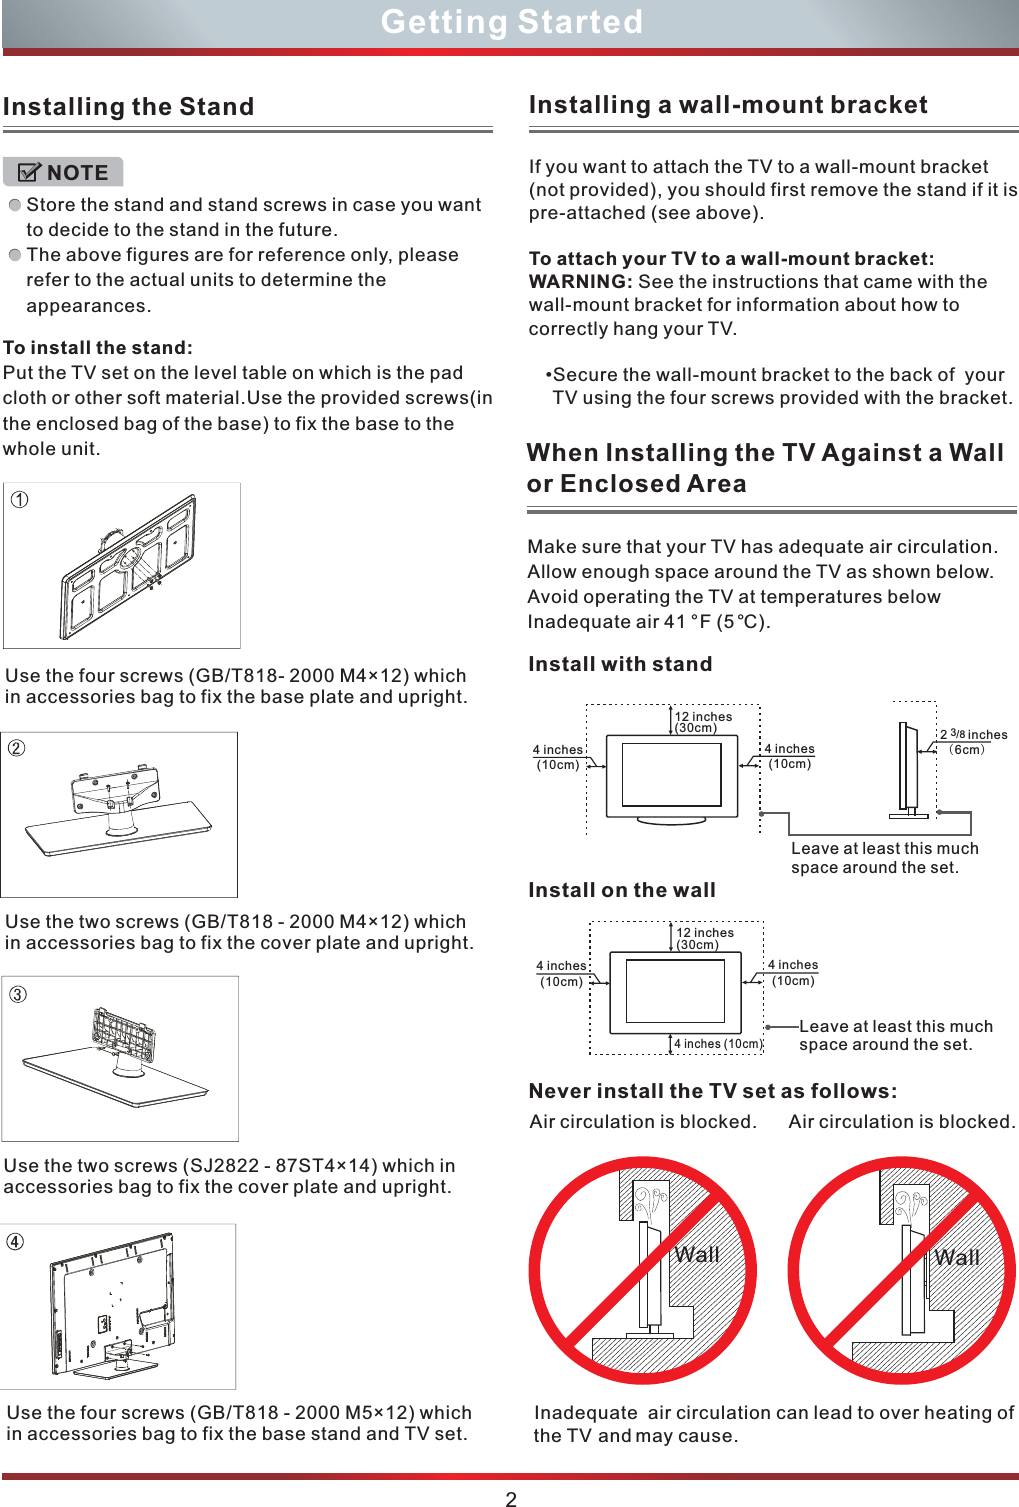 To install the stand:Put the TV set on the level table on which is the pad cloth or other soft material.Use the provided screws(in the enclosed bag of the base) to fix the base to the whole unit.Inadequate  air circulation can lead to over heating of the TV and may cause.Make sure that your TV has adequate air circulation. Allow enough space around the TV as shown below. Avoid operating the TV at temperatures below Inadequate air 41 ° F (5°C).Never install the TV set as follows:Air circulation is blocked. WallAir circulation is blocked. WallInstall on the wall4 inches(10cm)Leave at least this much space around the set.12 inches(30cm)4 inches (10cm)4 inches(10cm)12 inches(30cm)4 inches(10cm)4 inches(10cm)Install with stand2      inches  (6cm)/83Leave at least this much space around the set.When Installing the TV Against a Wall or Enclosed AreaInstalling the StandStore the stand and stand screws in case you want to decide to the stand in the future.The above figures are for reference only, please refer to the actual units to determine the appearances.NOTE2Getting StartedInstalling a wall-mount bracketIf you want to attach the TV to a wall-mount bracket (not provided), you should first remove the stand if it is pre-attached (see above).To attach your TV to a wall-mount bracket:WARNING: See the instructions that came with the wall-mount bracket for information about how to correctly hang your TV.•Secure the wall-mount bracket to the back of  your TV using the four screws provided with the bracket.  Use the four screws (GB/T818- 2000 M4×12) whichin accessories bag to fix the base plate and upright. Use the two screws (GB/T818 - 2000 M4×12) whichin accessories bag to fix the cover plate and upright. Use the two screws (SJ2822 - 87ST4×14) which in accessories bag to fix the cover plate and upright. Use the four screws (GB/T818 - 2000 M5×12) whichin accessories bag to fix the base stand and TV set. 